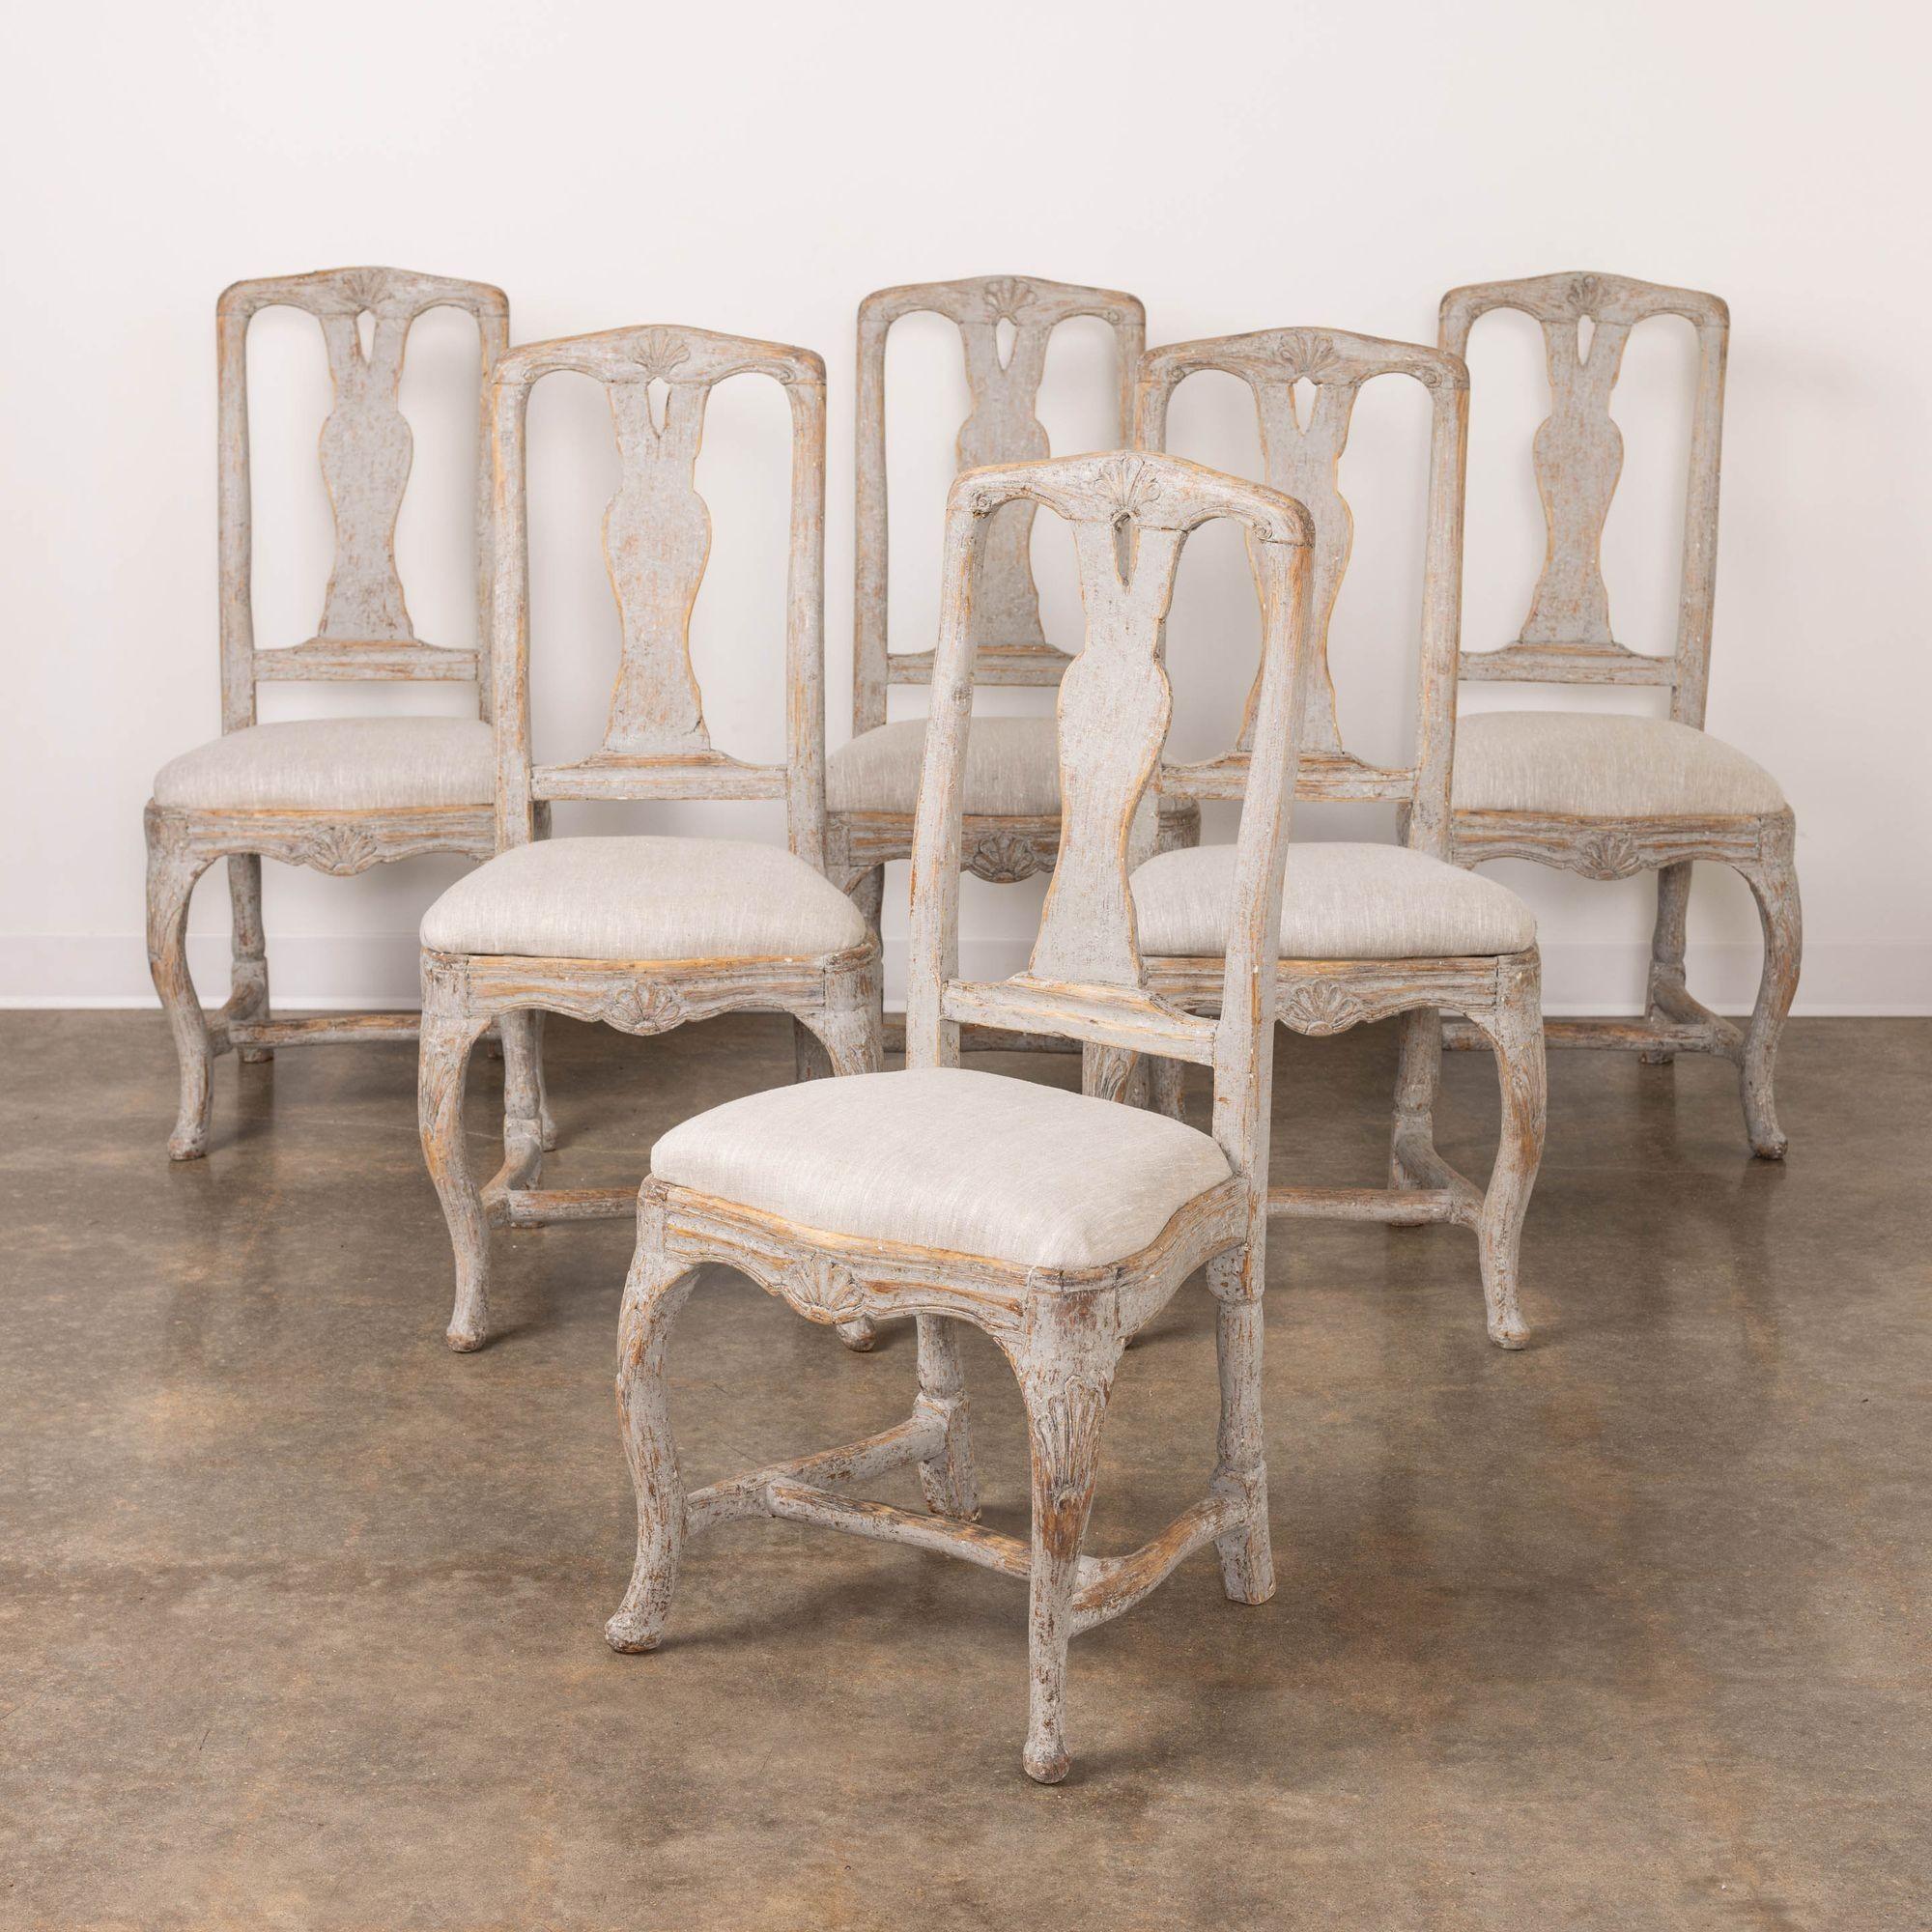 A very fine set of six Swedish dining chairs from the Rococo period, newly upholstered in linen with pierced splat backs, shell motif on the backs, seat frames, and legs, carved and shaped seat rail, refined cabriole legs, H-stretcher, and sip